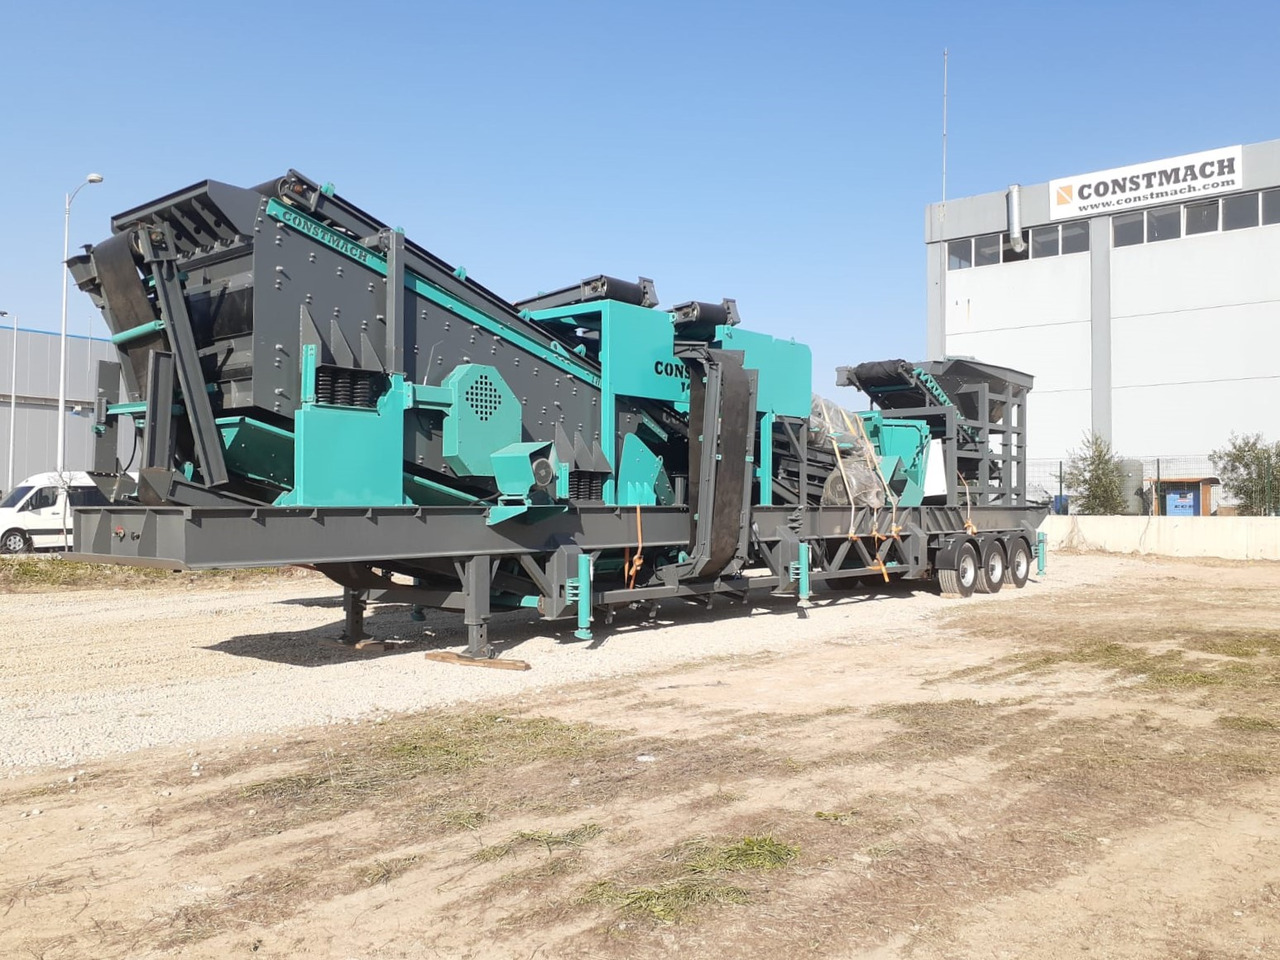 Leasing para Constmach JC-1 Mobile Backenbrecheranlage 60-80 tph Constmach JC-1 Mobile Backenbrecheranlage 60-80 tph: foto 1